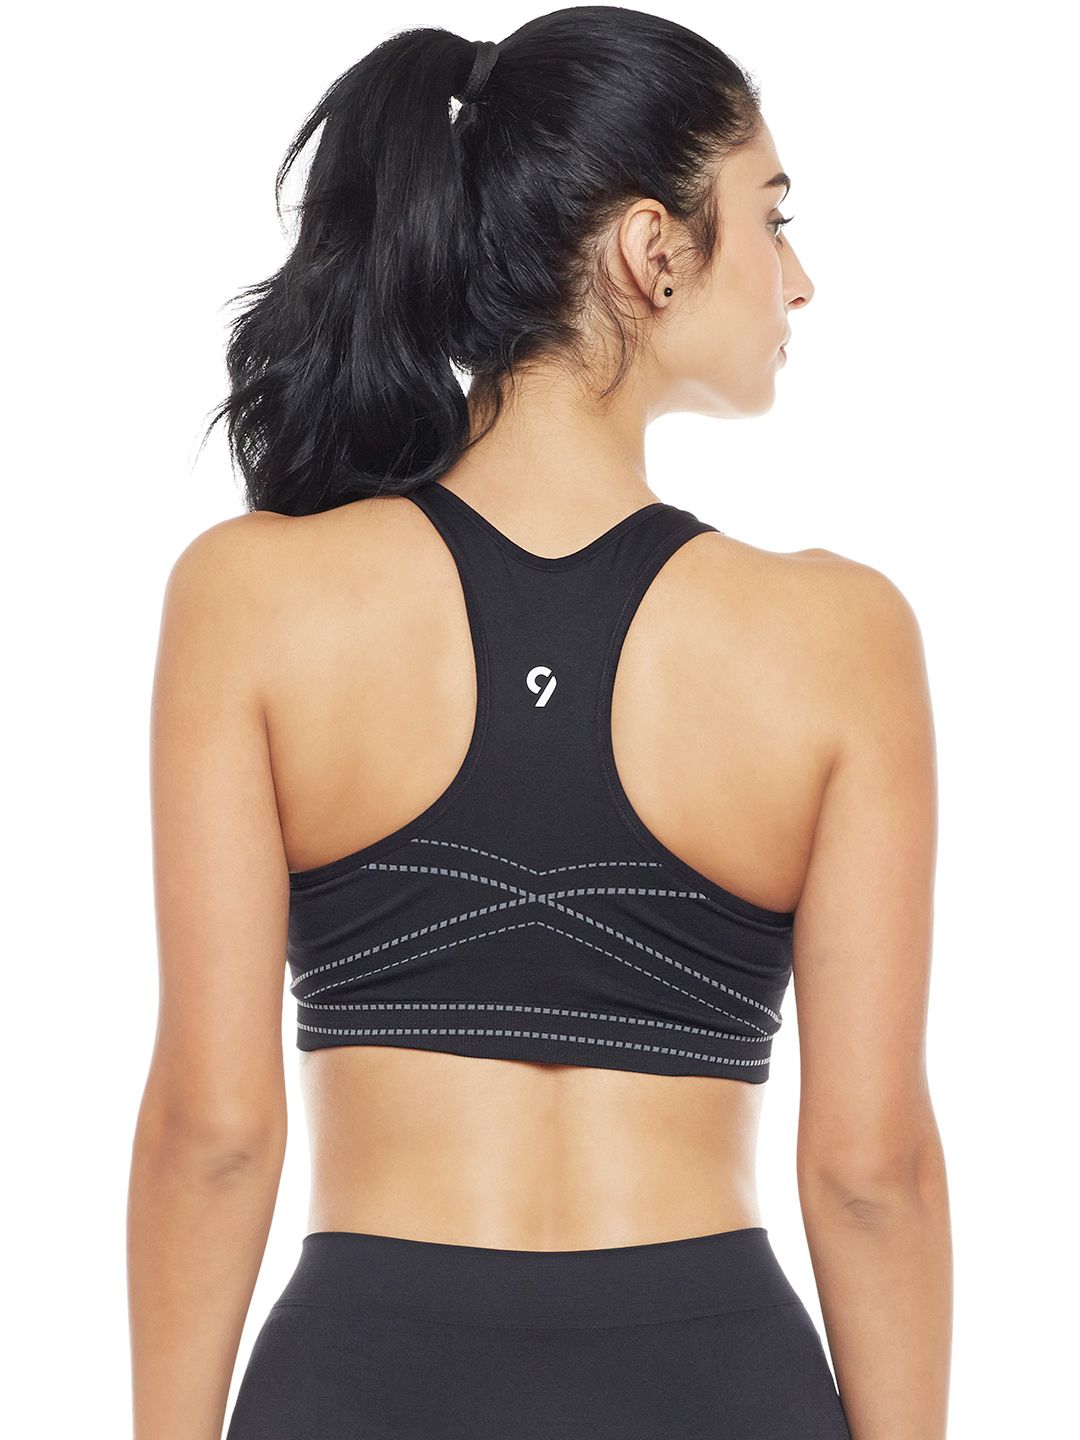 C9 AIRWEAR Women Black Printed Non-Wired Lightly Padded Racerback Sports Bra PZ2223_BLACK Price in India